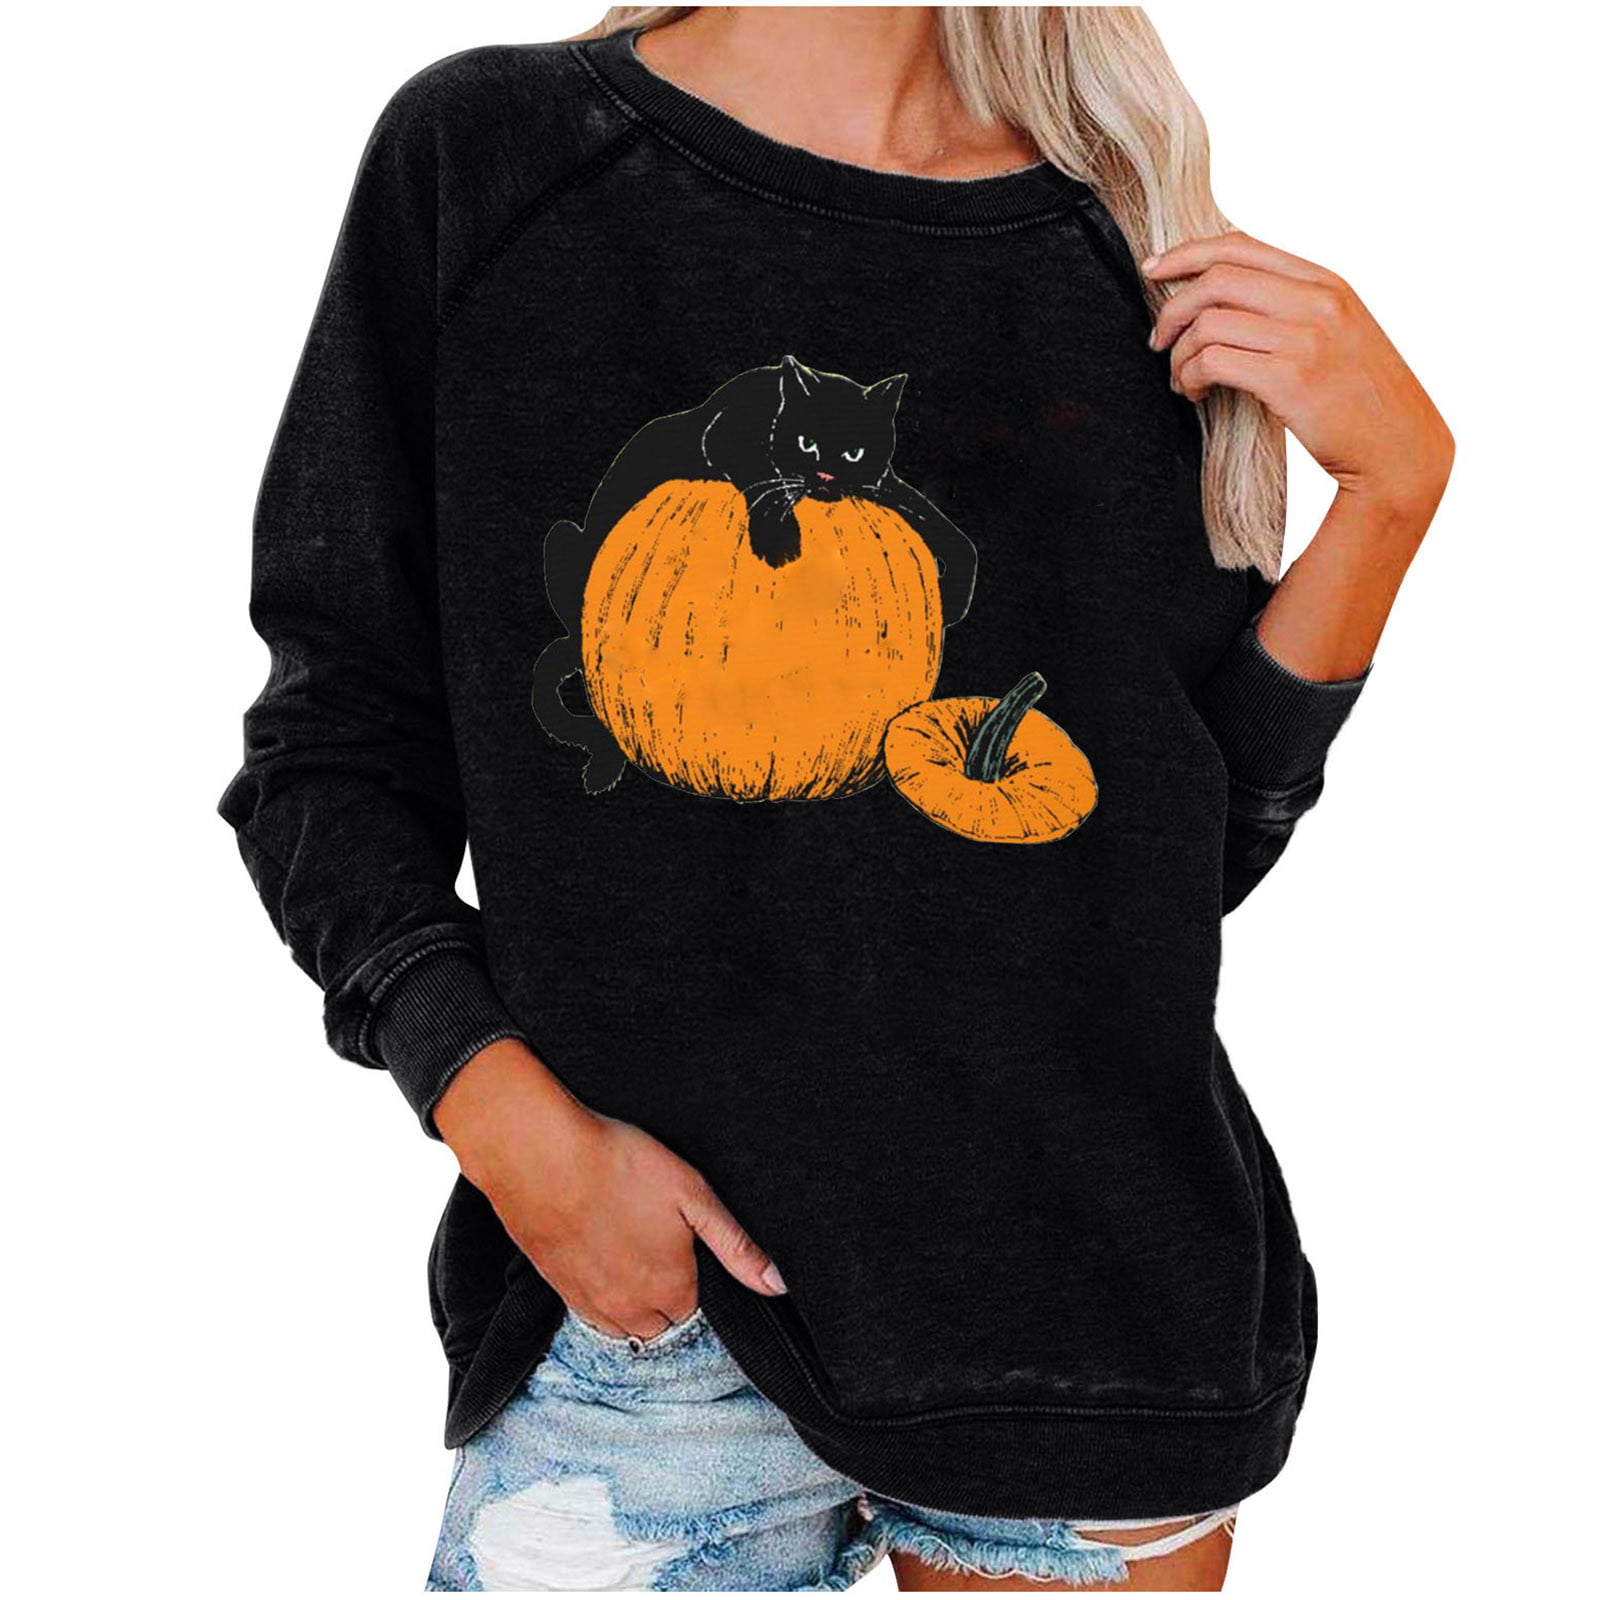 Happy Halloween Cats RHINESTONE T-Shirt Shirt Tee Bling Pick Shirt Style Spooky Holiday Pumpkin Costume Party Scoop Neck V-Neck Crew Neck Trick or Treating 